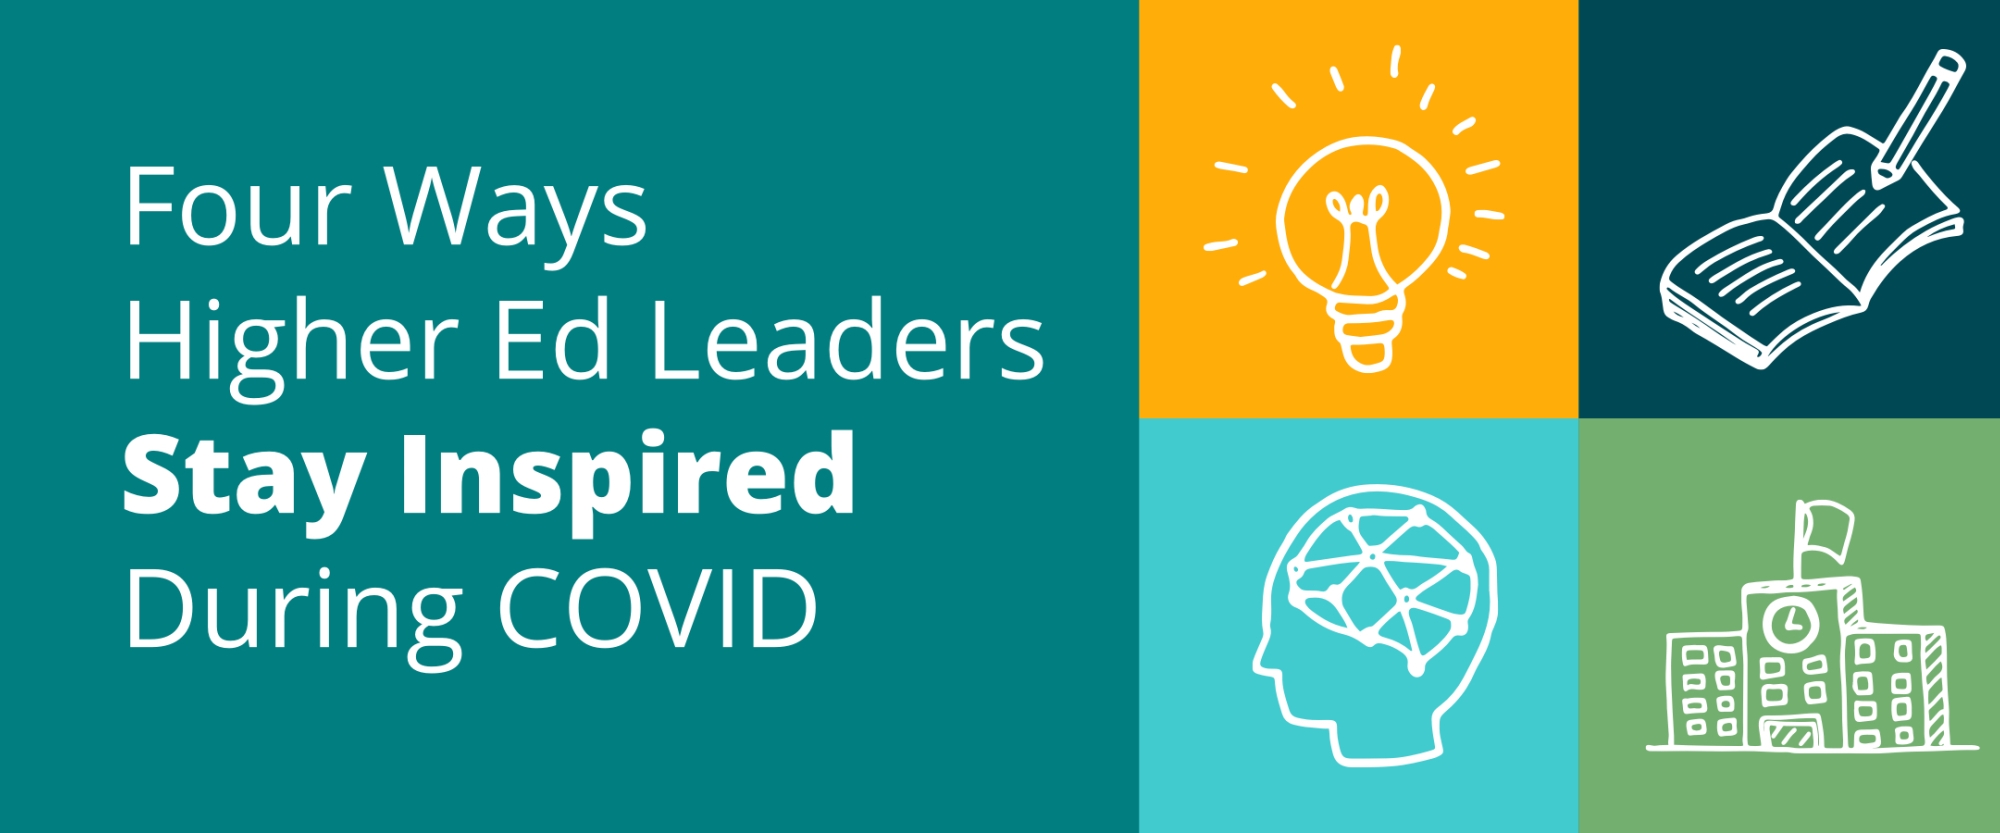 Four Ways Higher Ed Leaders Stay Inspired During COVID